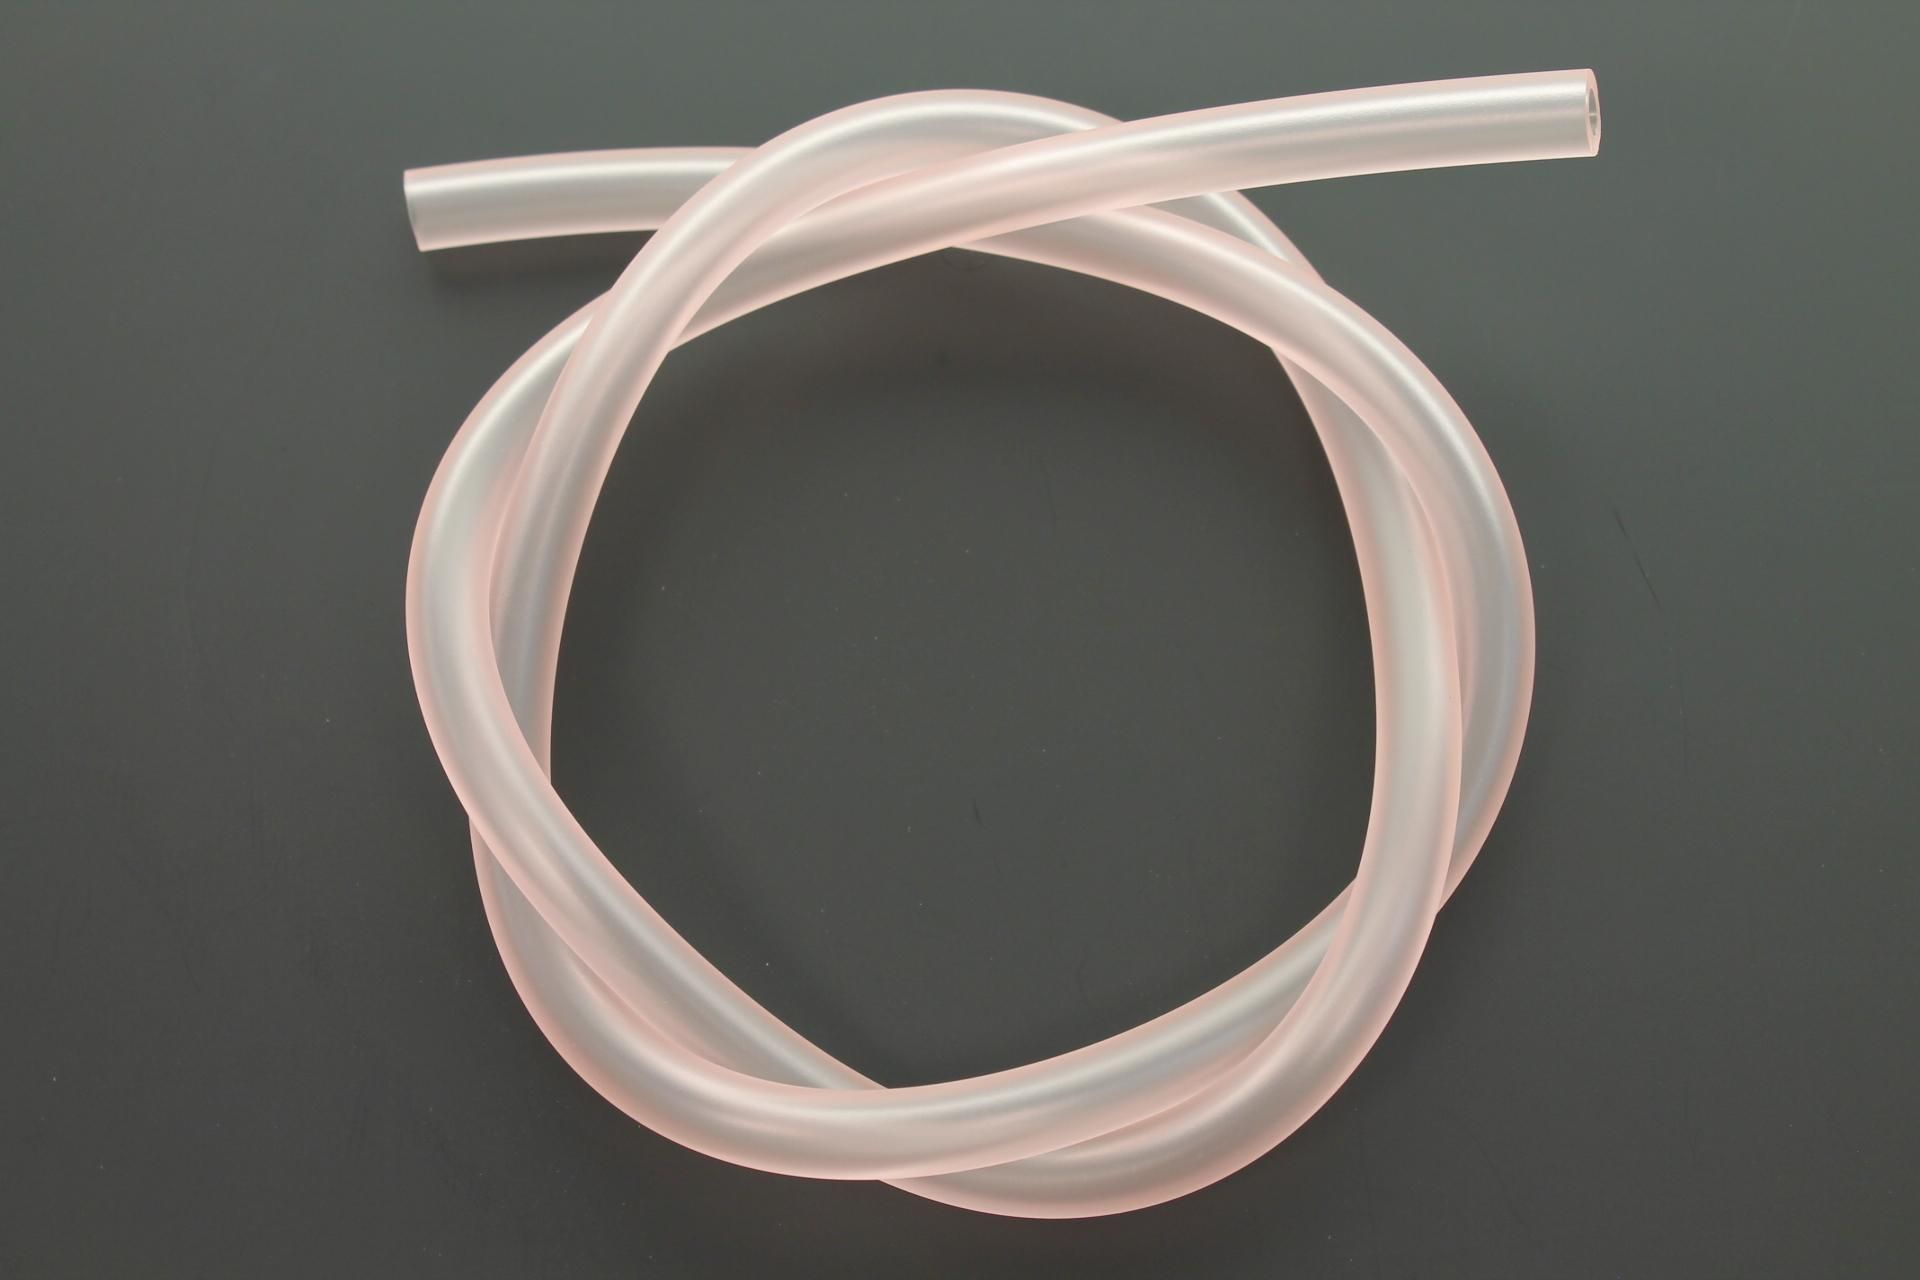 91A20-05048-00 Superseded by 91A20-05080-00 - TUBE, FLEXIBLE